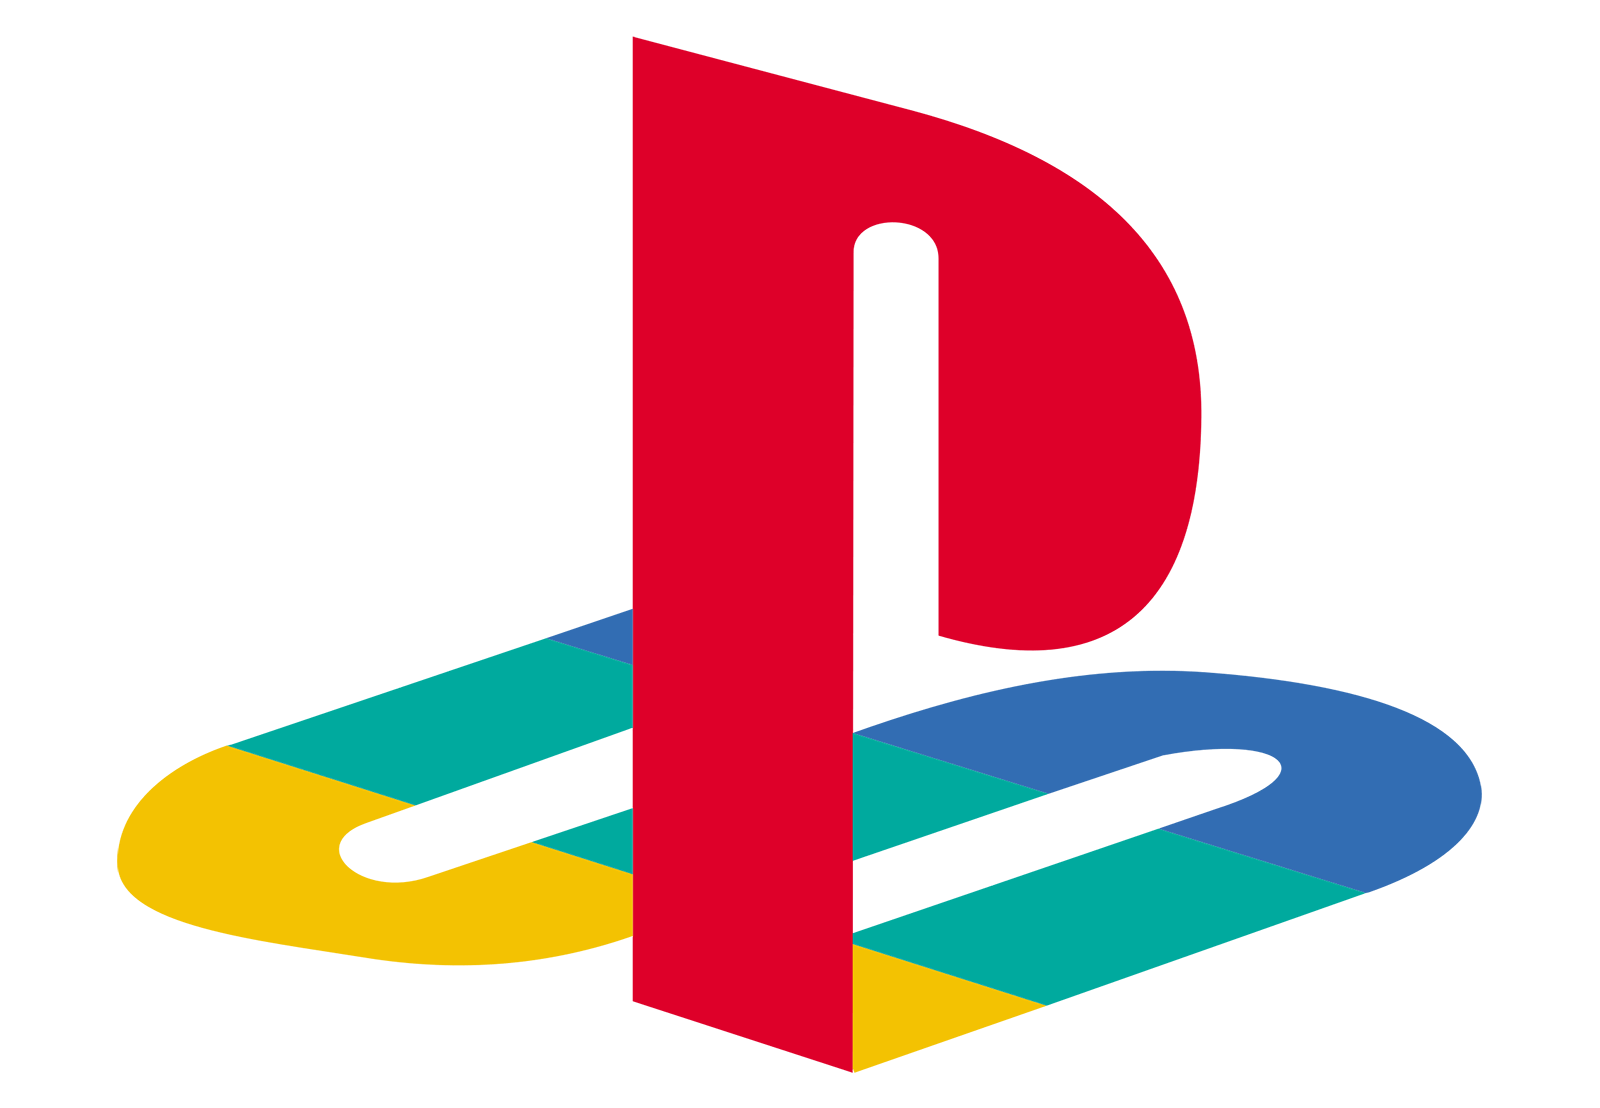 Playsation Logo - Meaning PlayStation logo and symbol. history and evolution